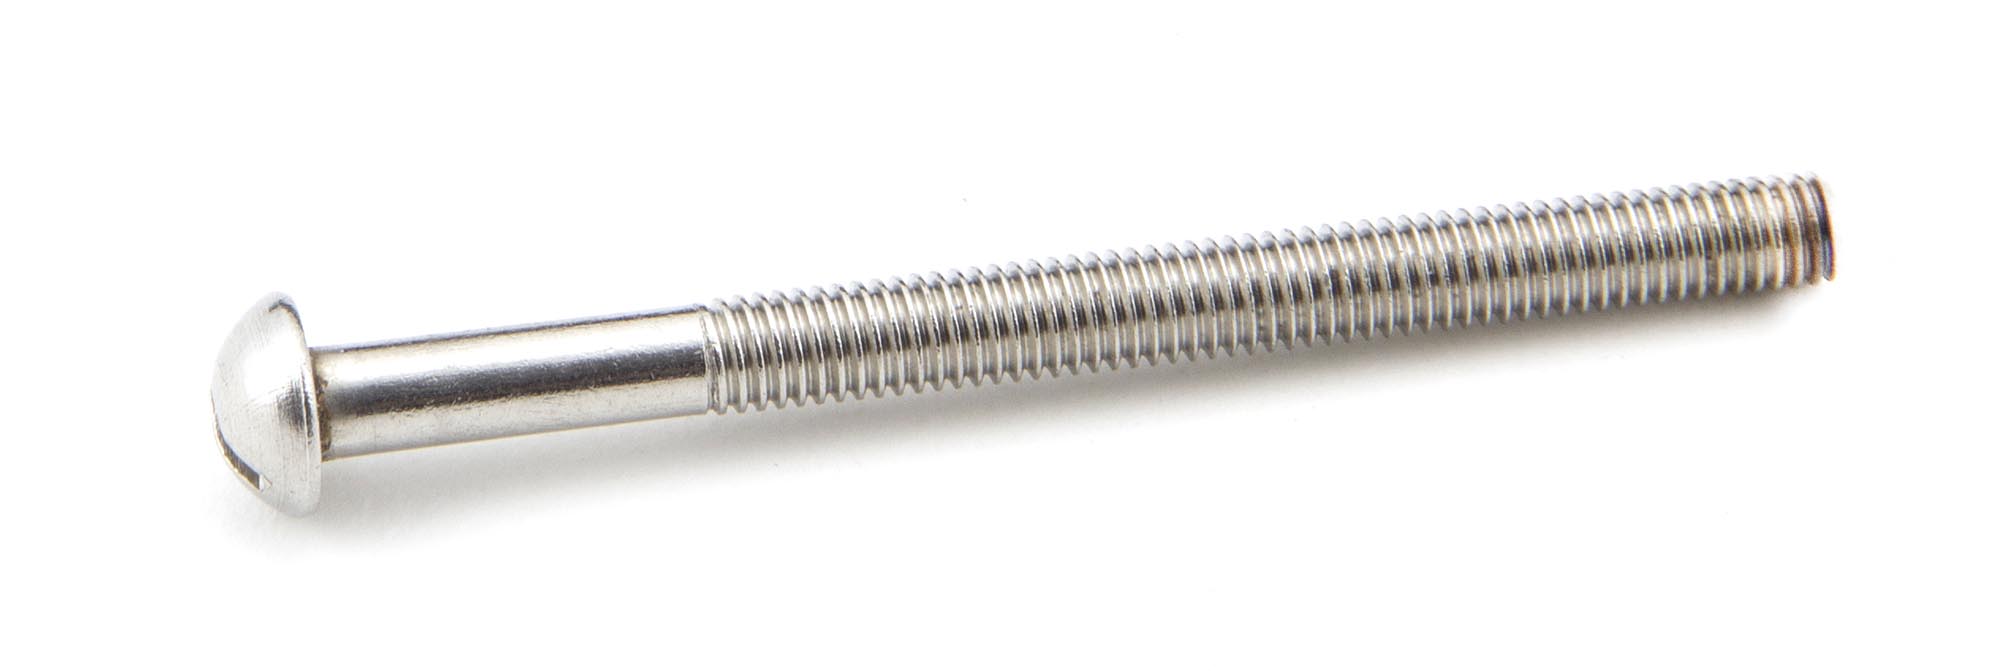 FTA 91766 STAINLESS STEEL M5 X 64MM MALE BOLT (1)